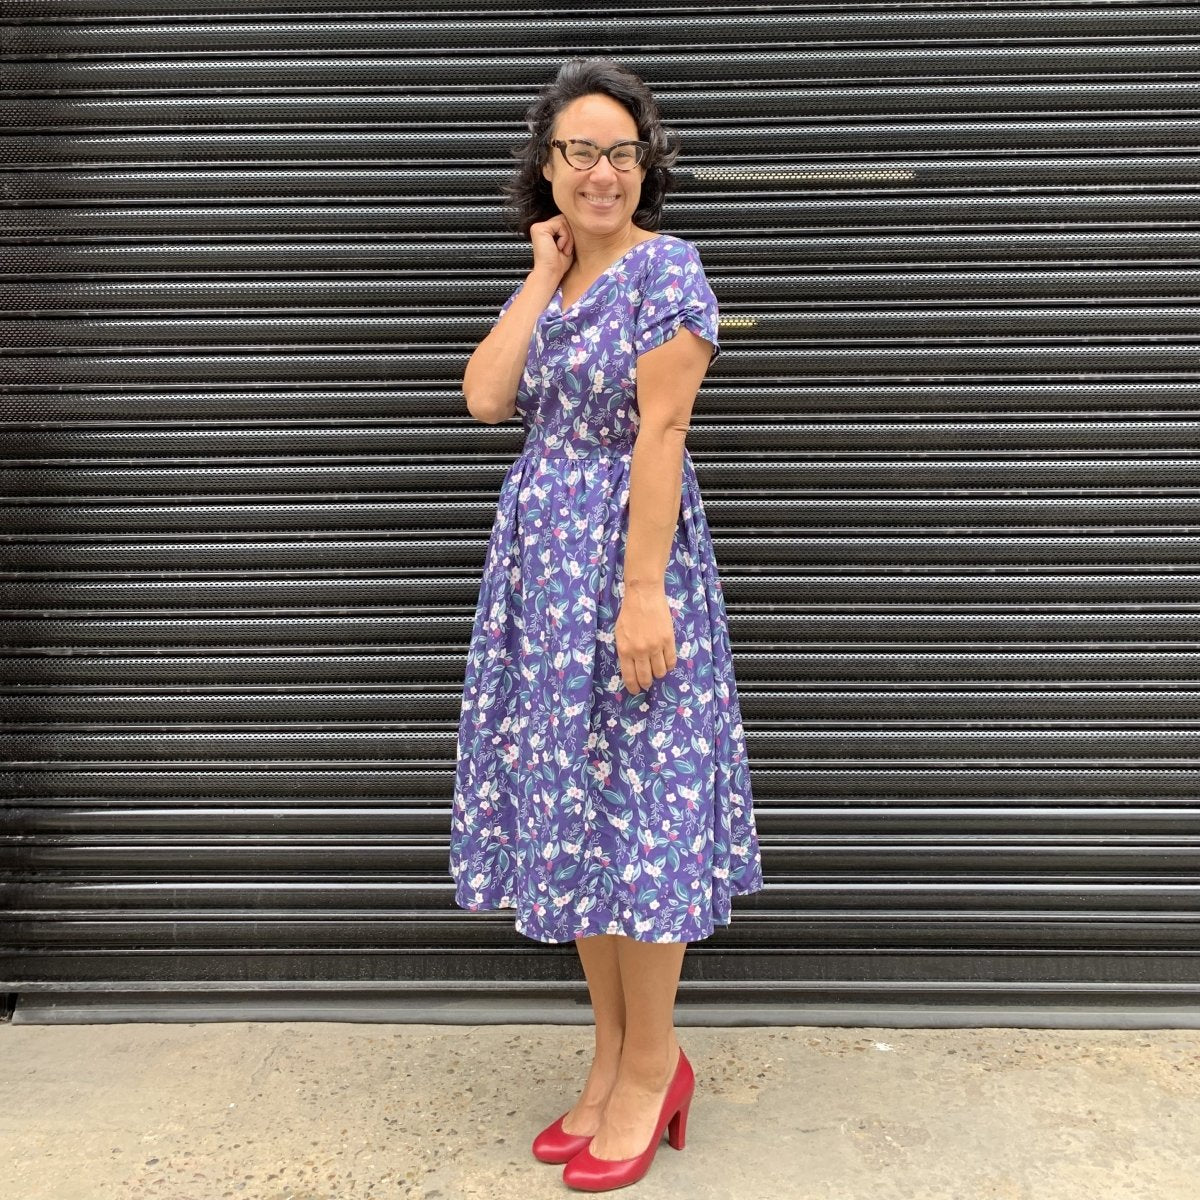 Rowena is pictured side on smiling whilst wearing a 1950s style dress in a bramble print